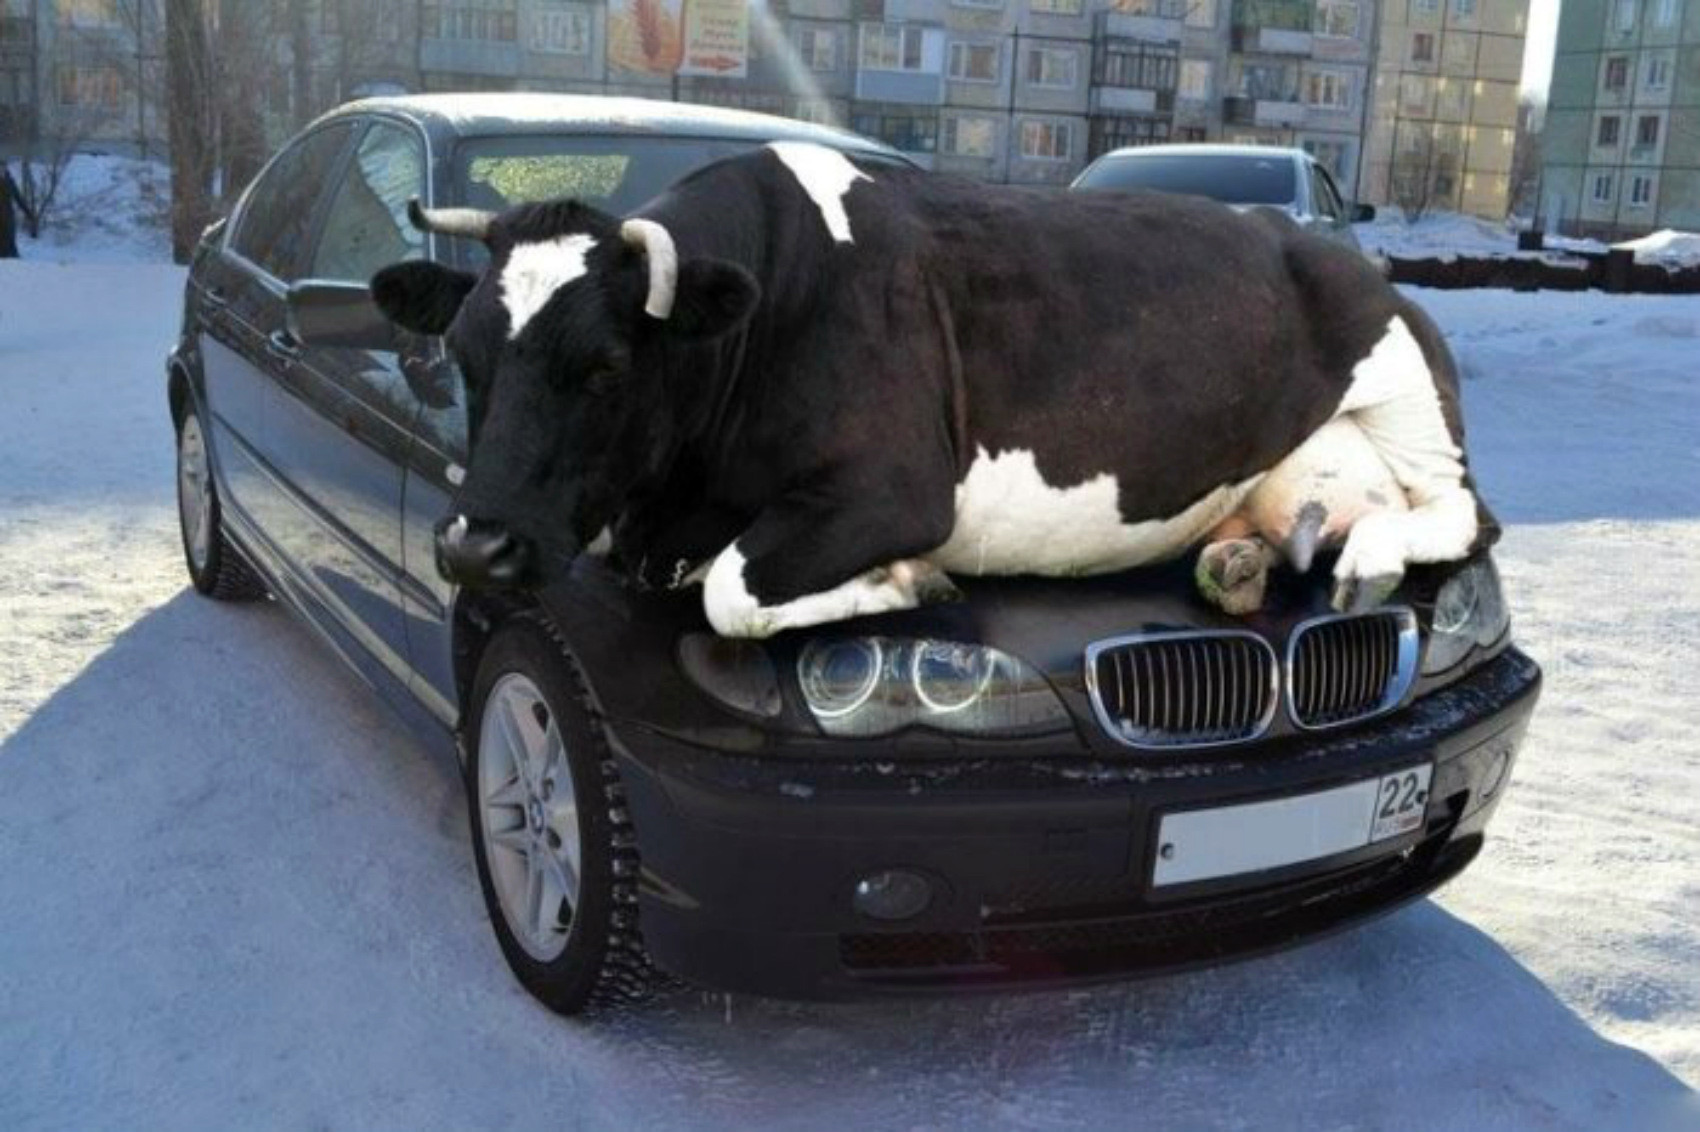 20 Very Funny Bull Pictures And Photos